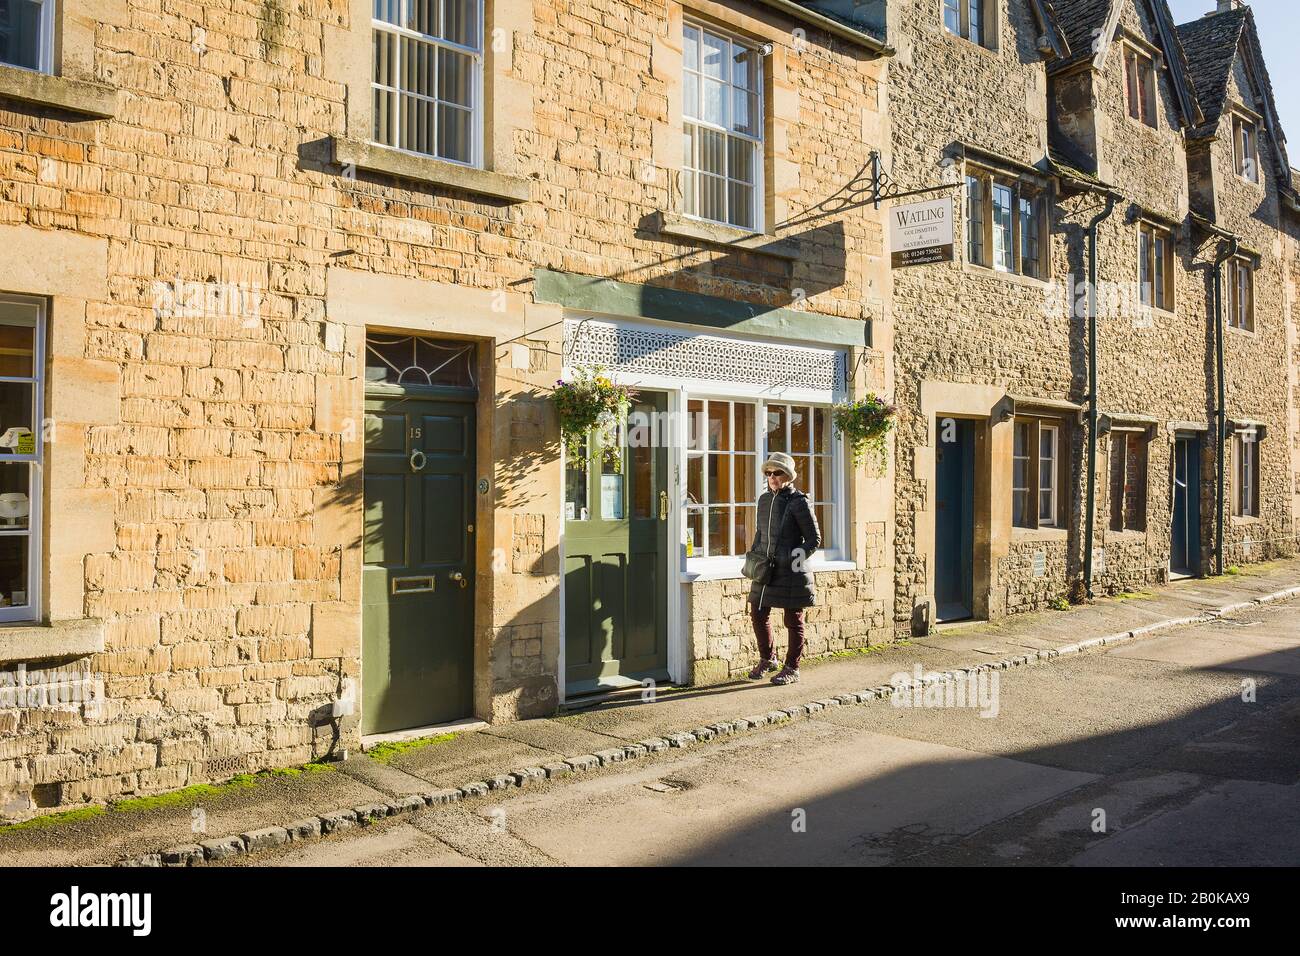 A well-dressed woman walks past a village jewellers shop in Lacock Wiltshire England UK Stock Photo